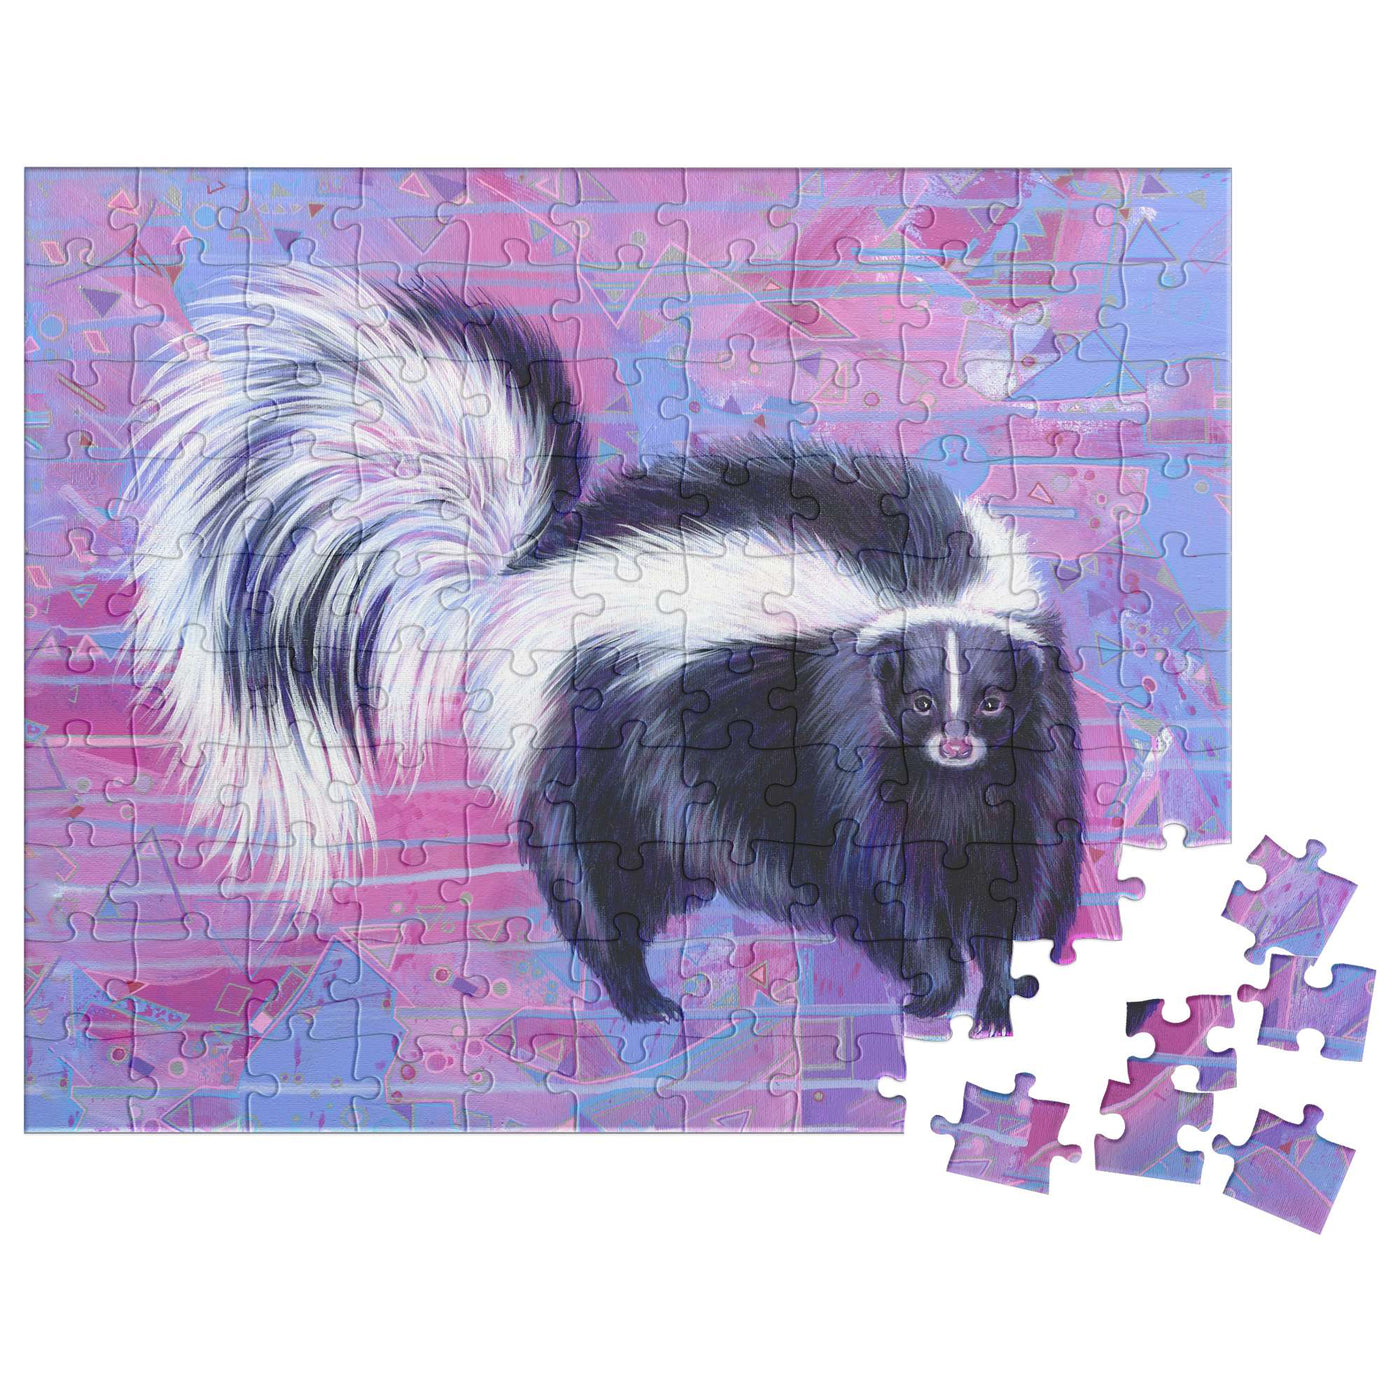 Skunk Puzzle with a few pieces detached, set against a pink and blue swirled background.